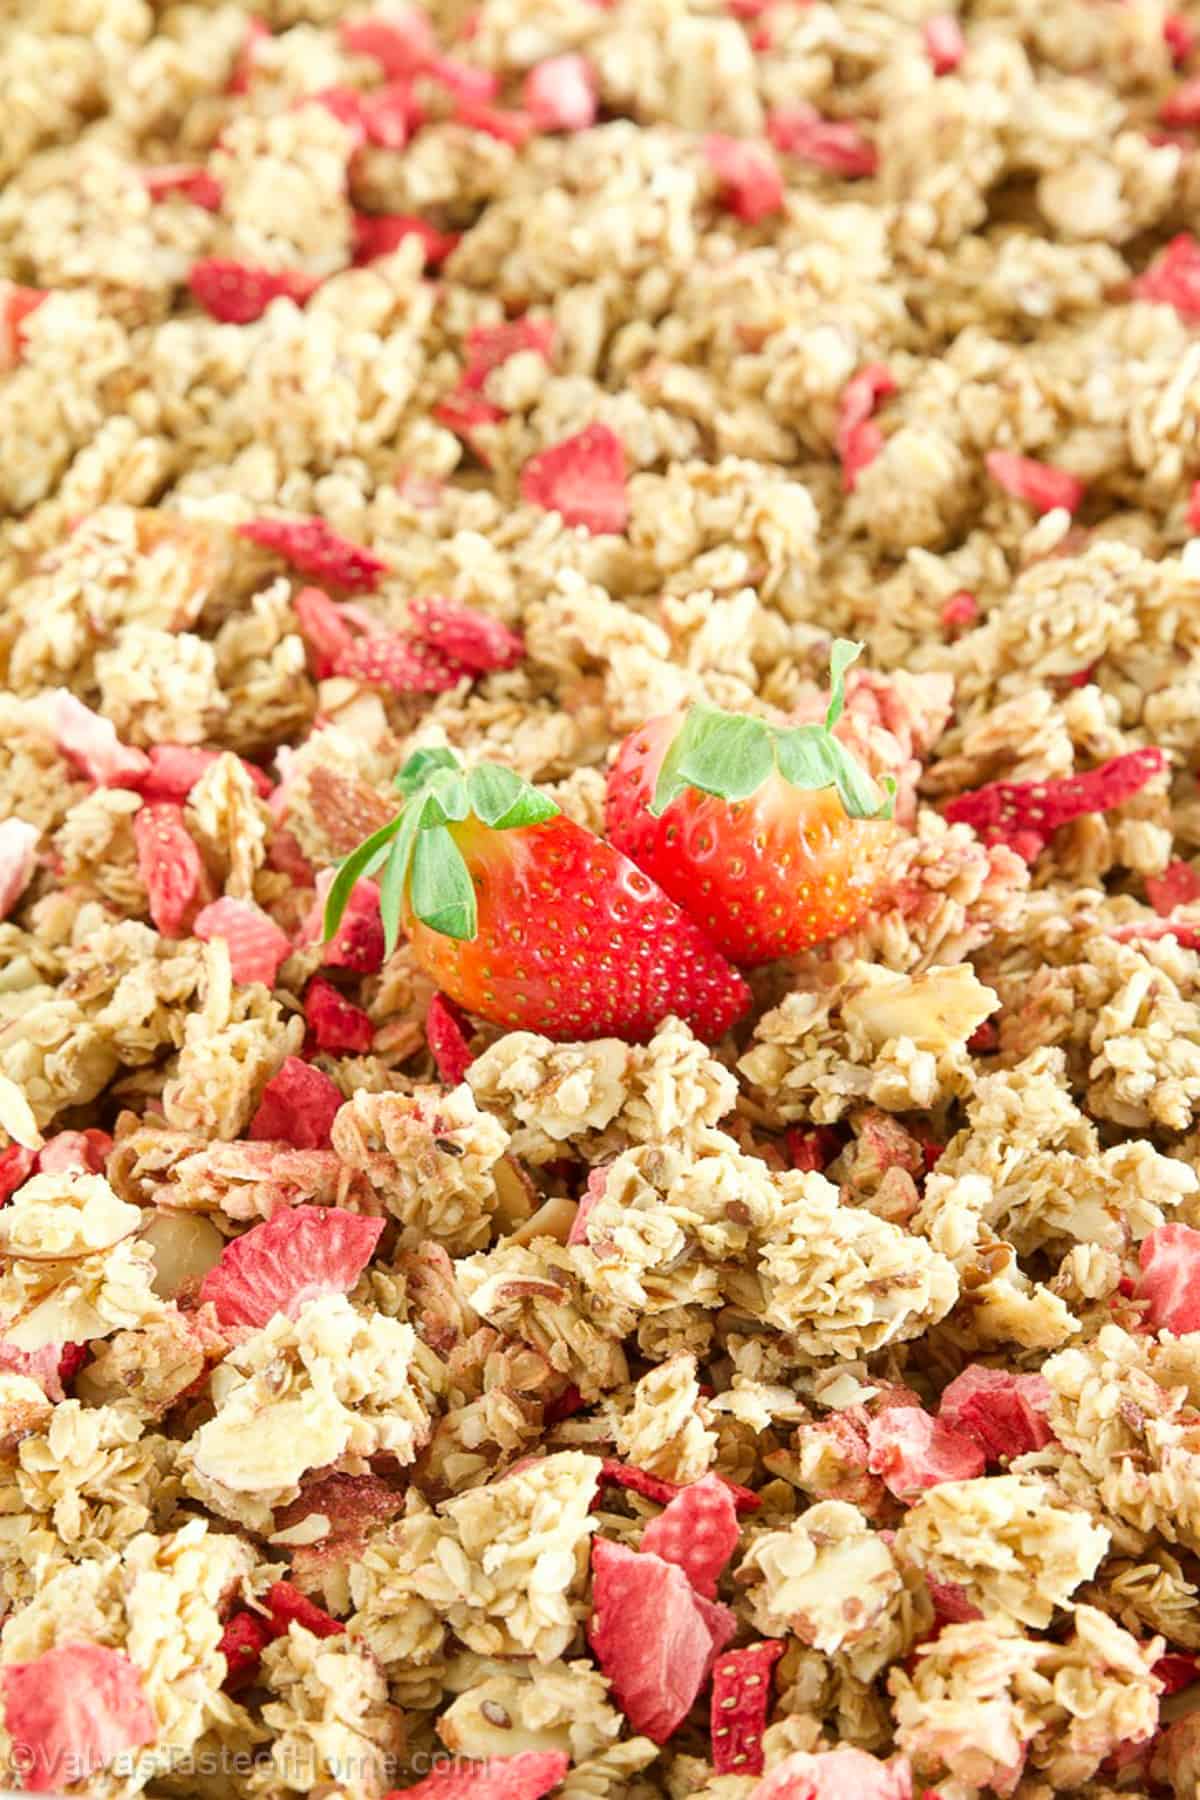 Making granola at home can mean you not only save a ton of money in the long-term, but you're also going to be able to have granola guilt-free since it's made with healthy ingredients that are incredibly good for you.